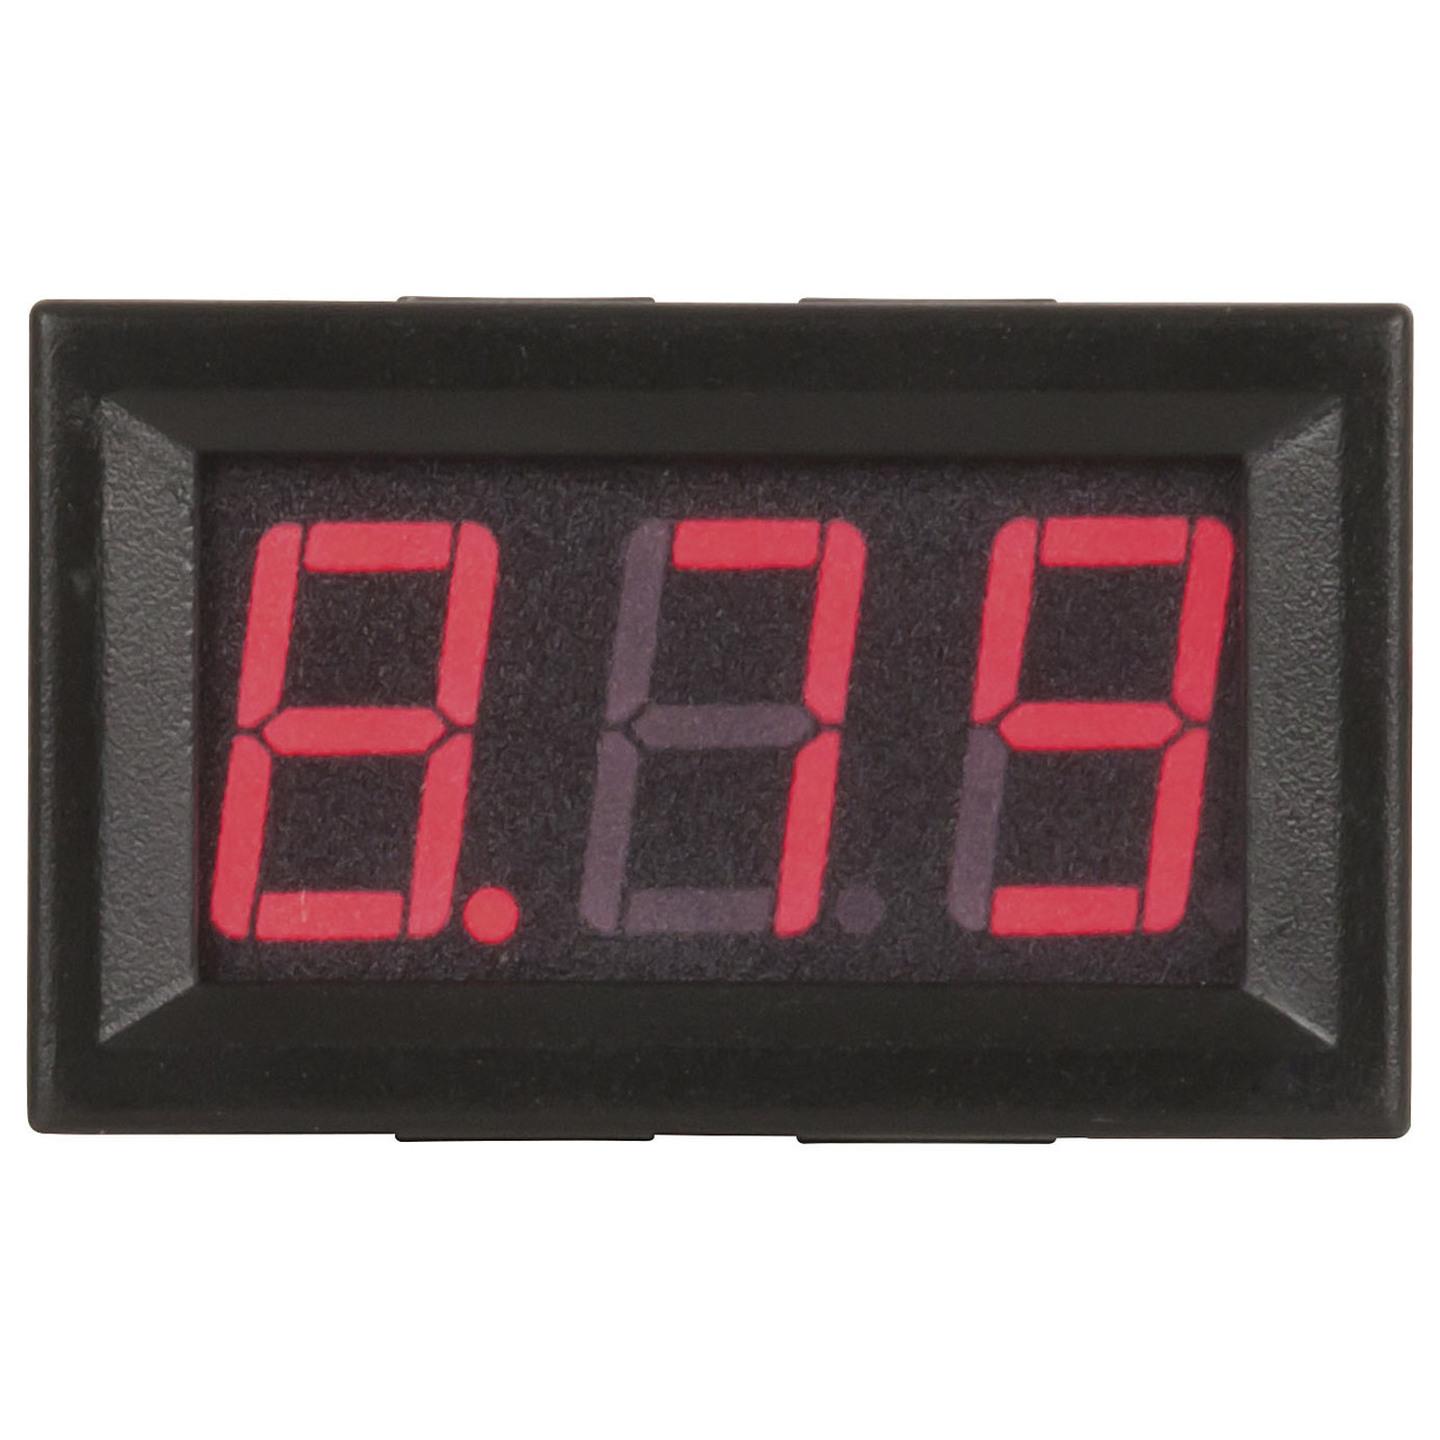 Self-Powered Red LED Voltmeter